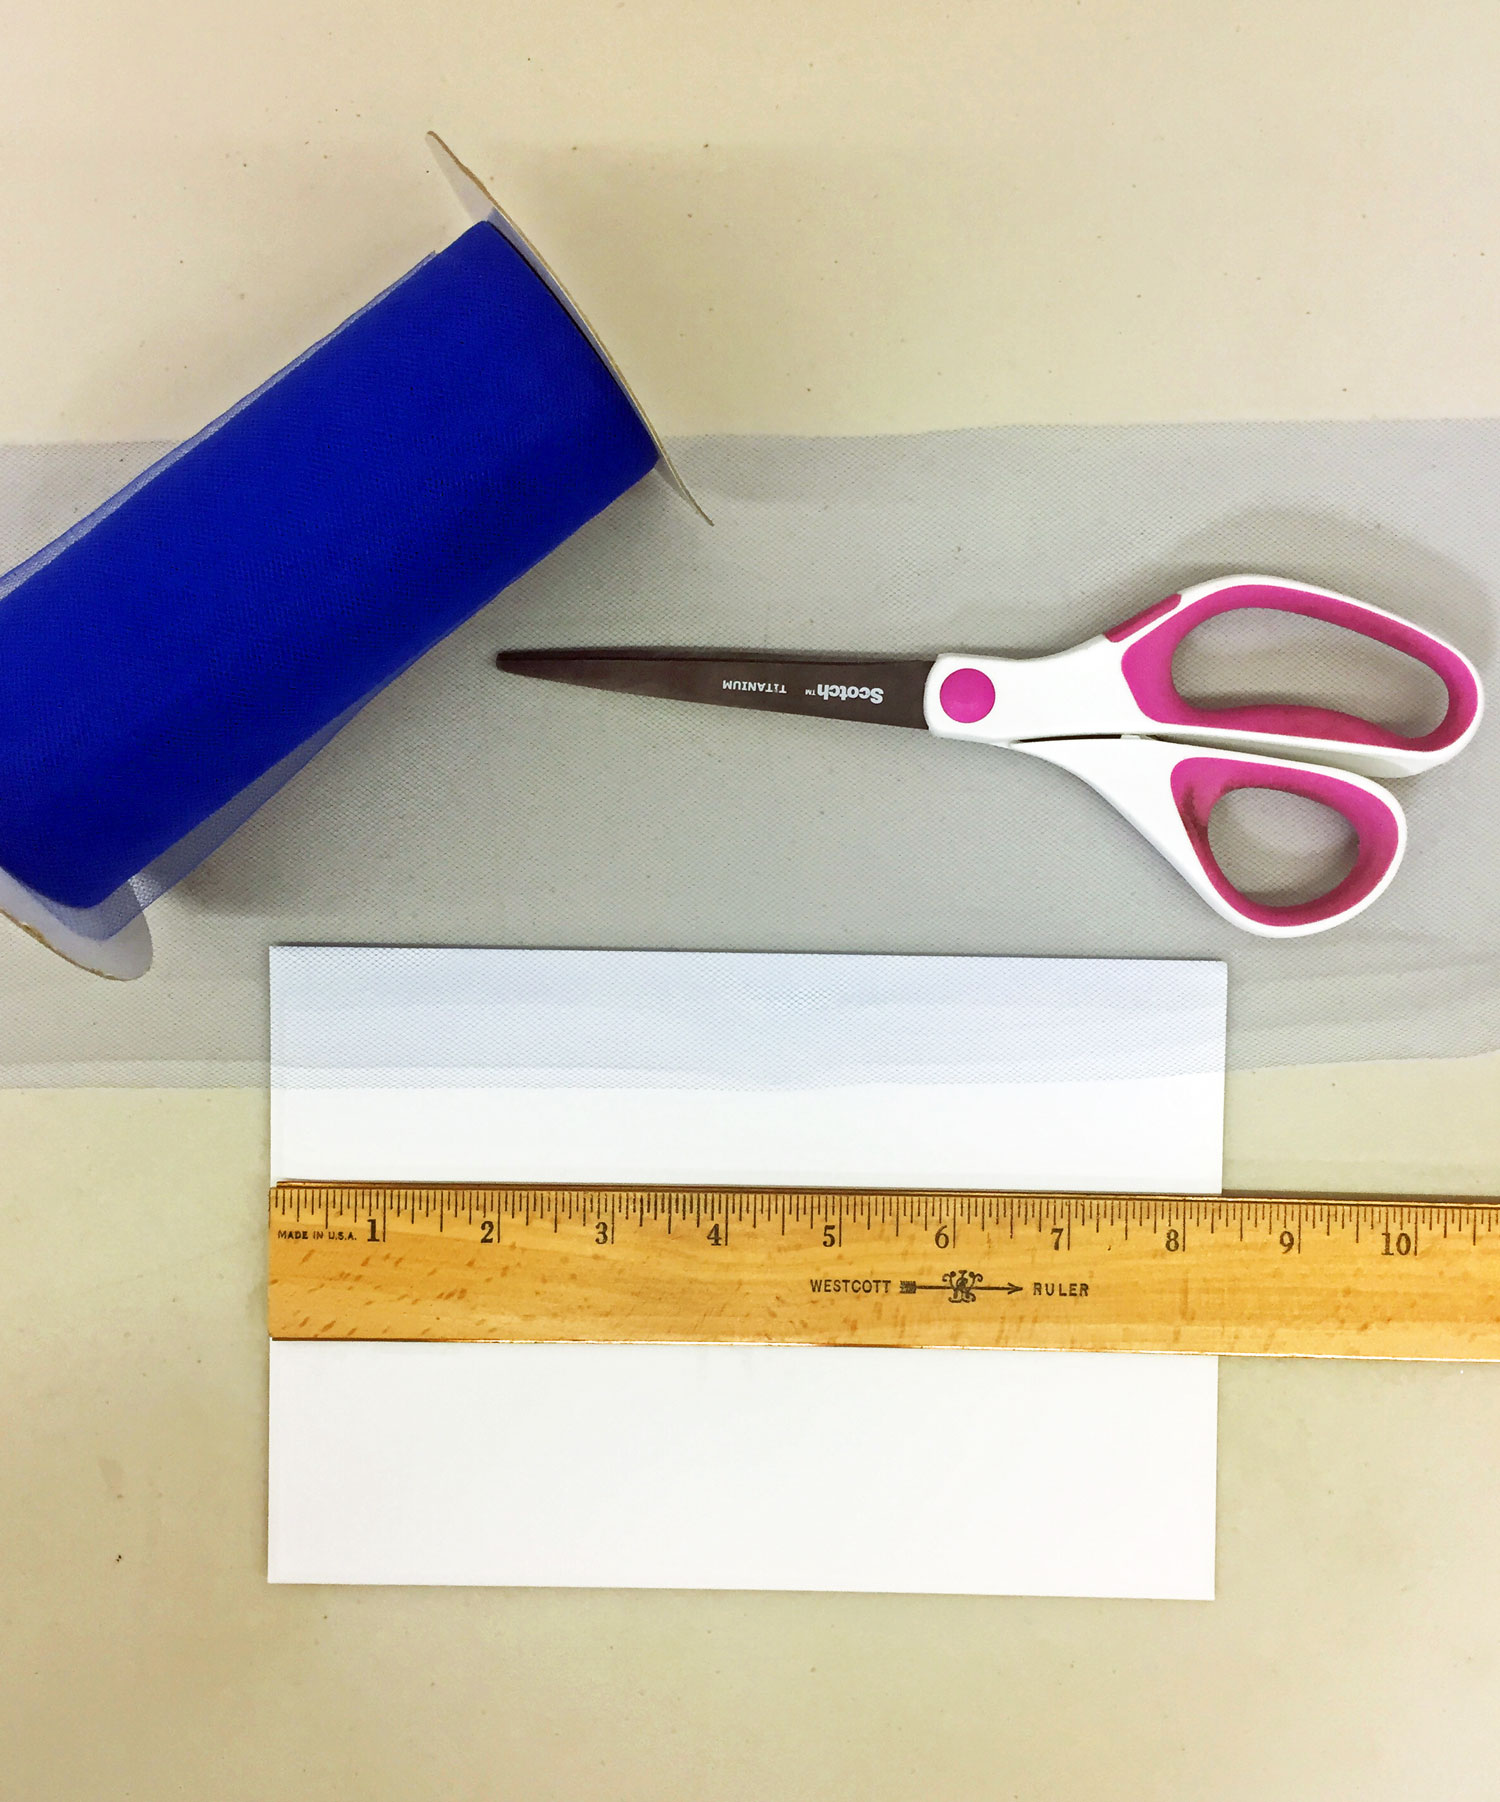 Step 1 is to cut a piece of ribbon that is 4 times the width of your envelope | OrnamentShop.com